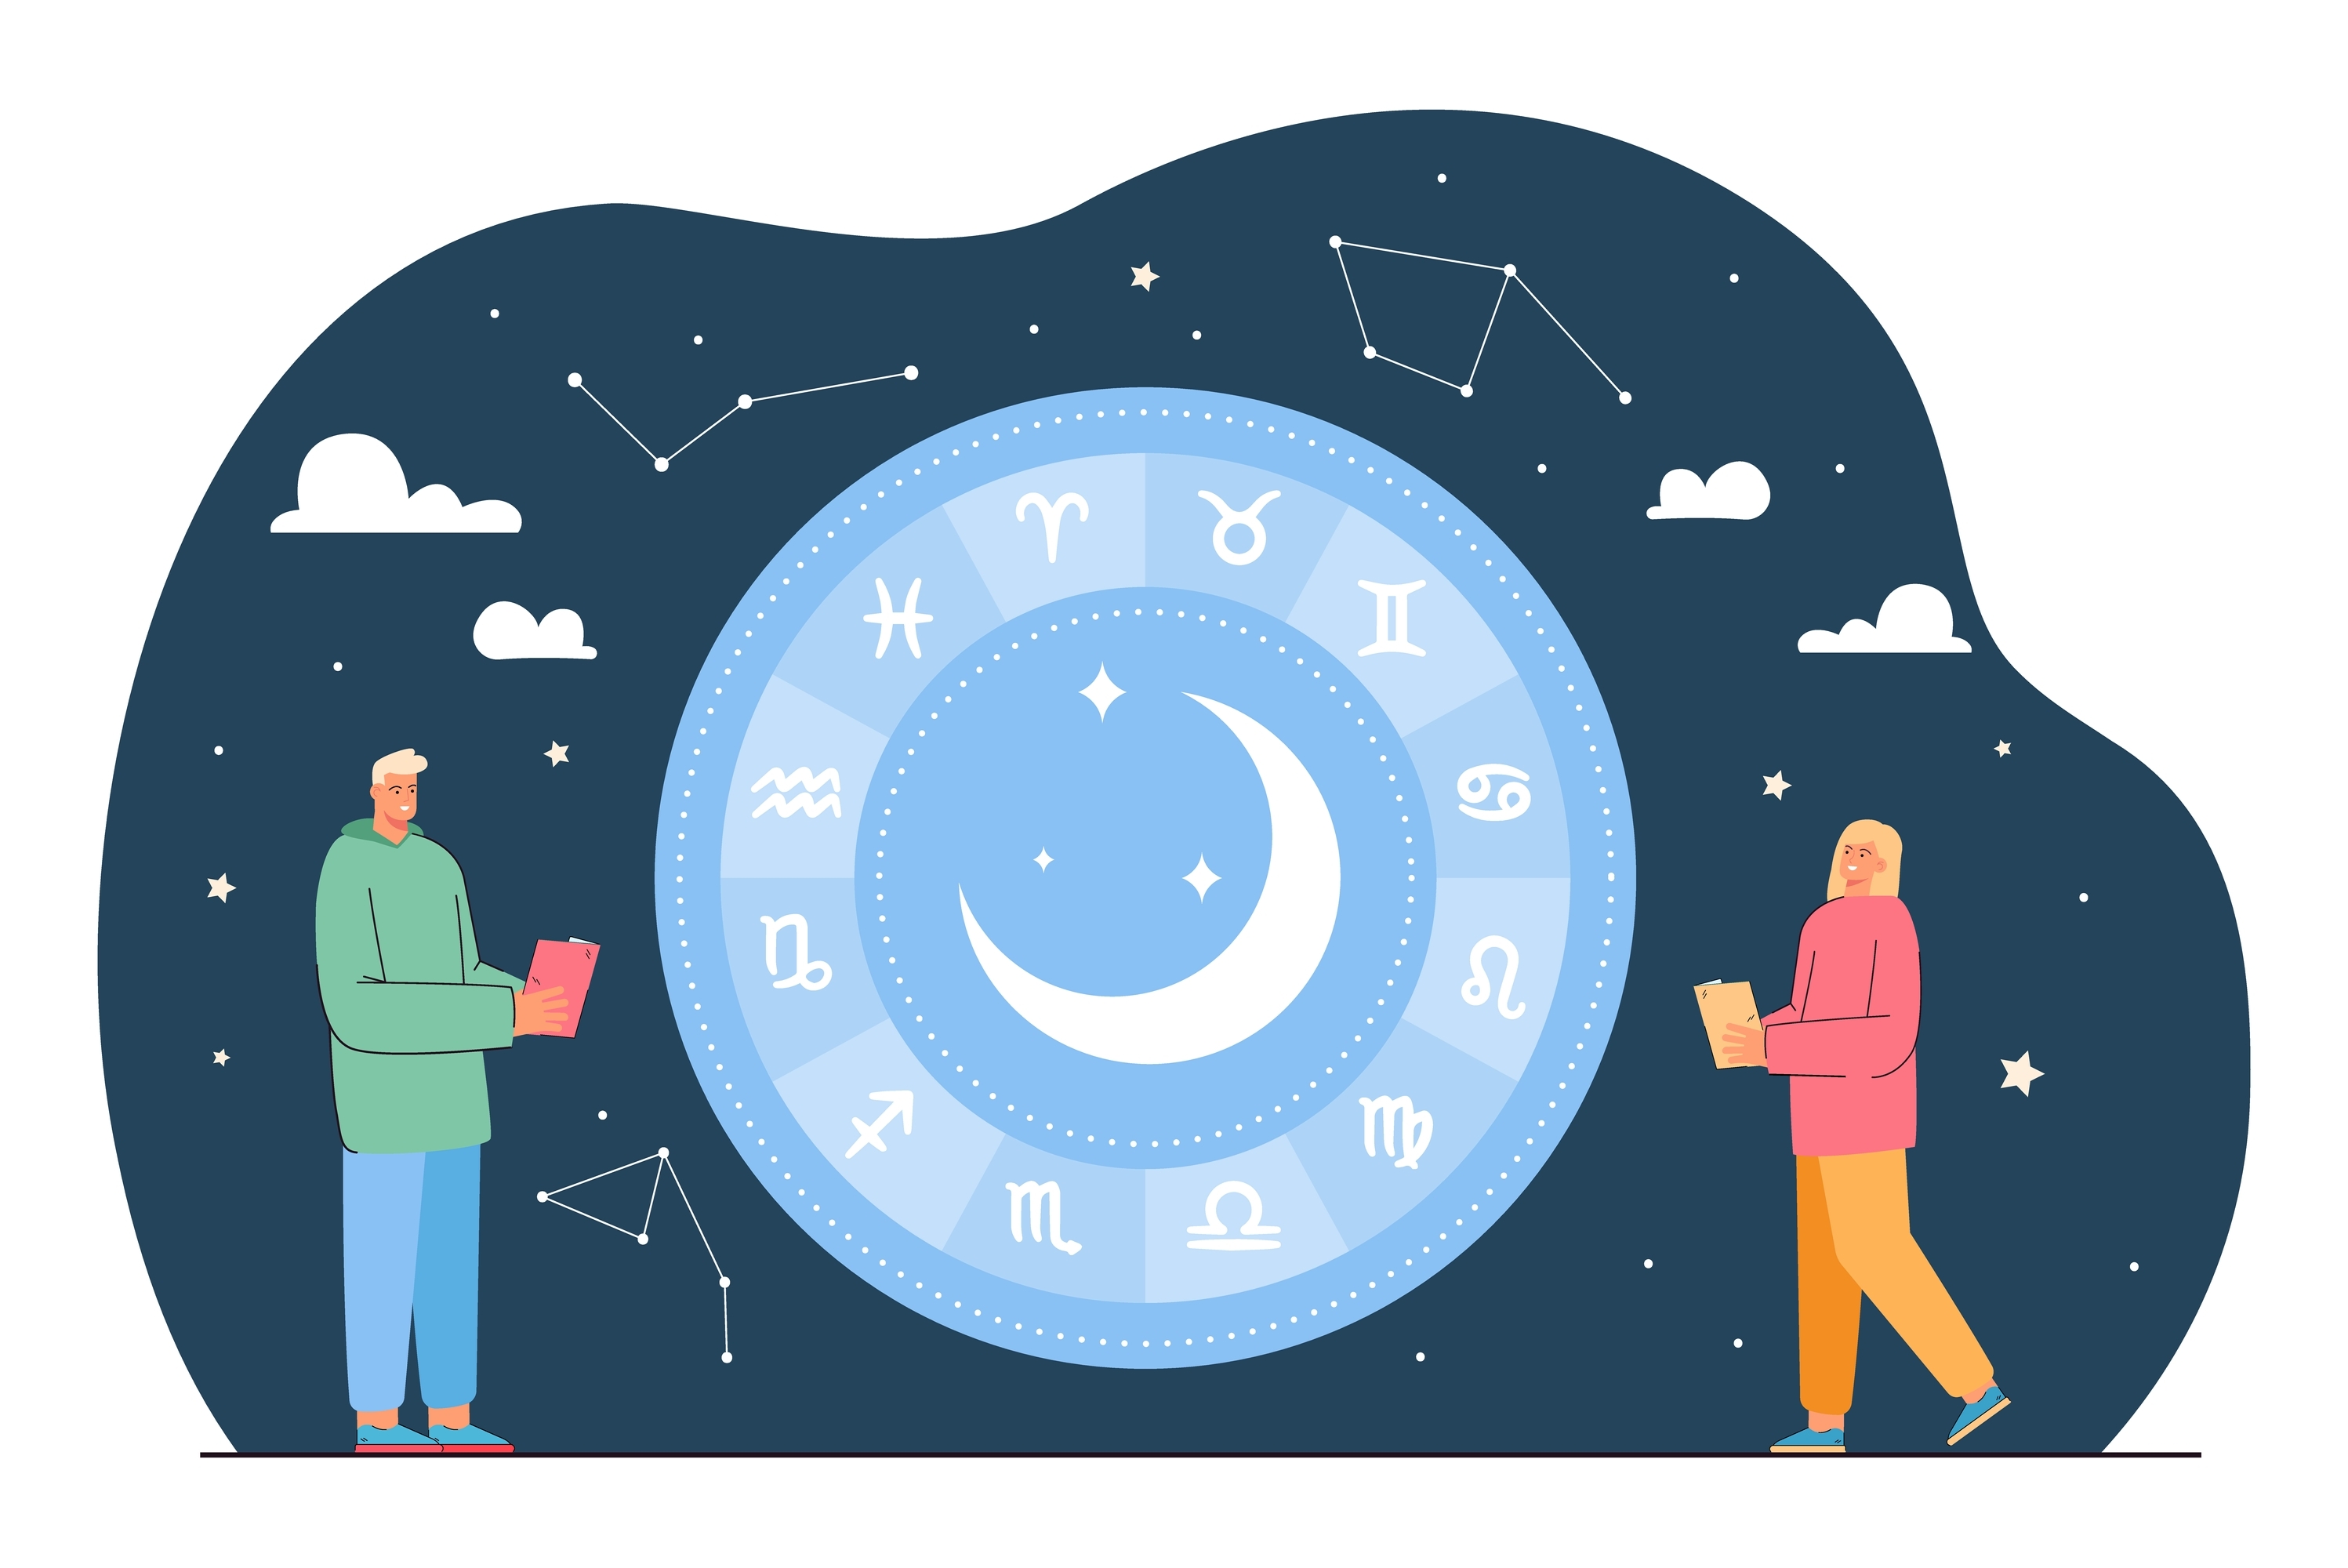 An illustration of a young couple on either side of the Horoscope chart at night | Source: Shutterstock